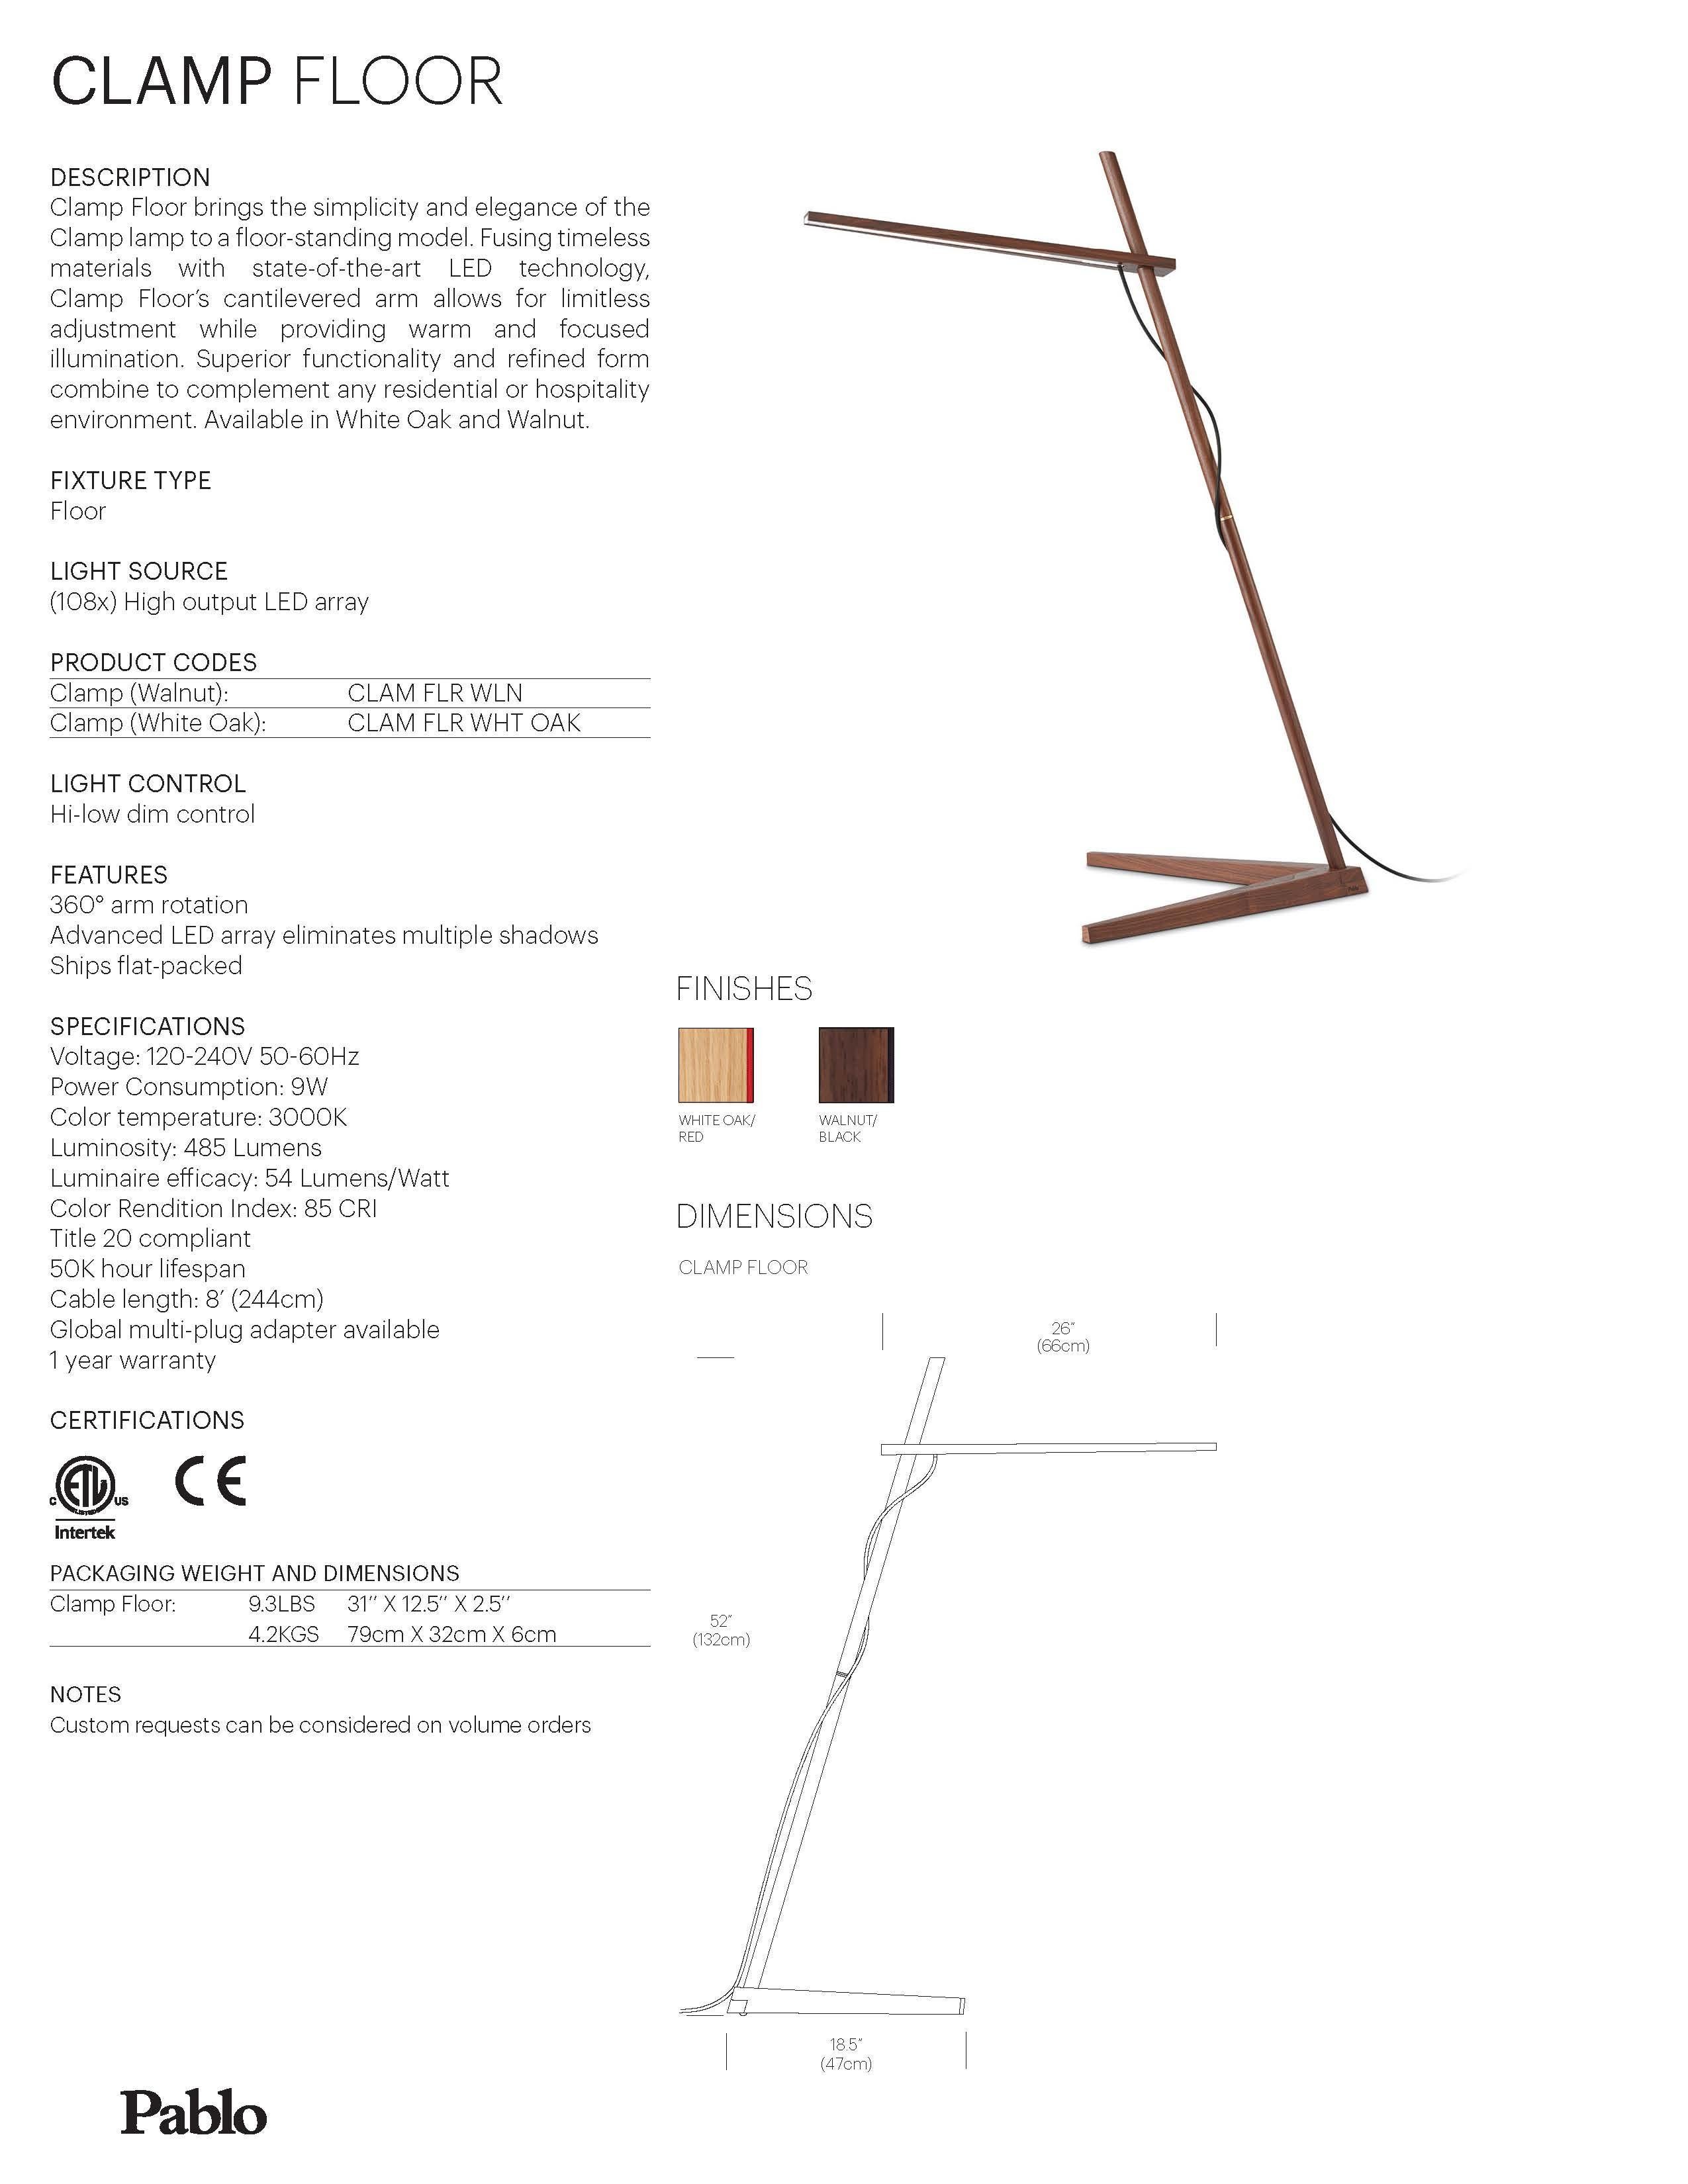 American Clamp Floor Lamp in Walnut by Pablo Designs